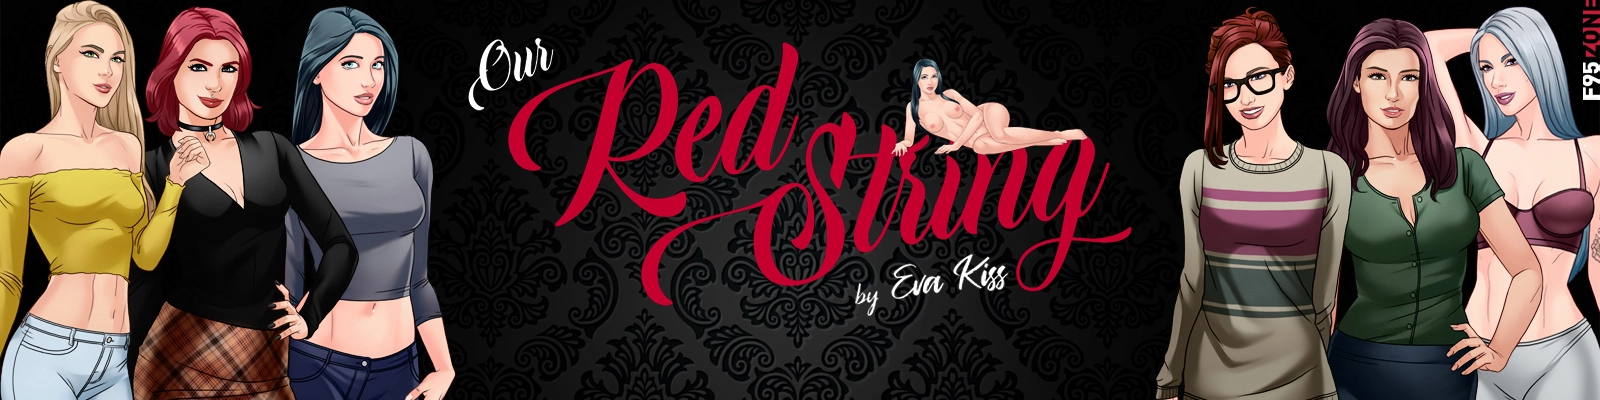 Our Red String [v0.2 Beta] main image